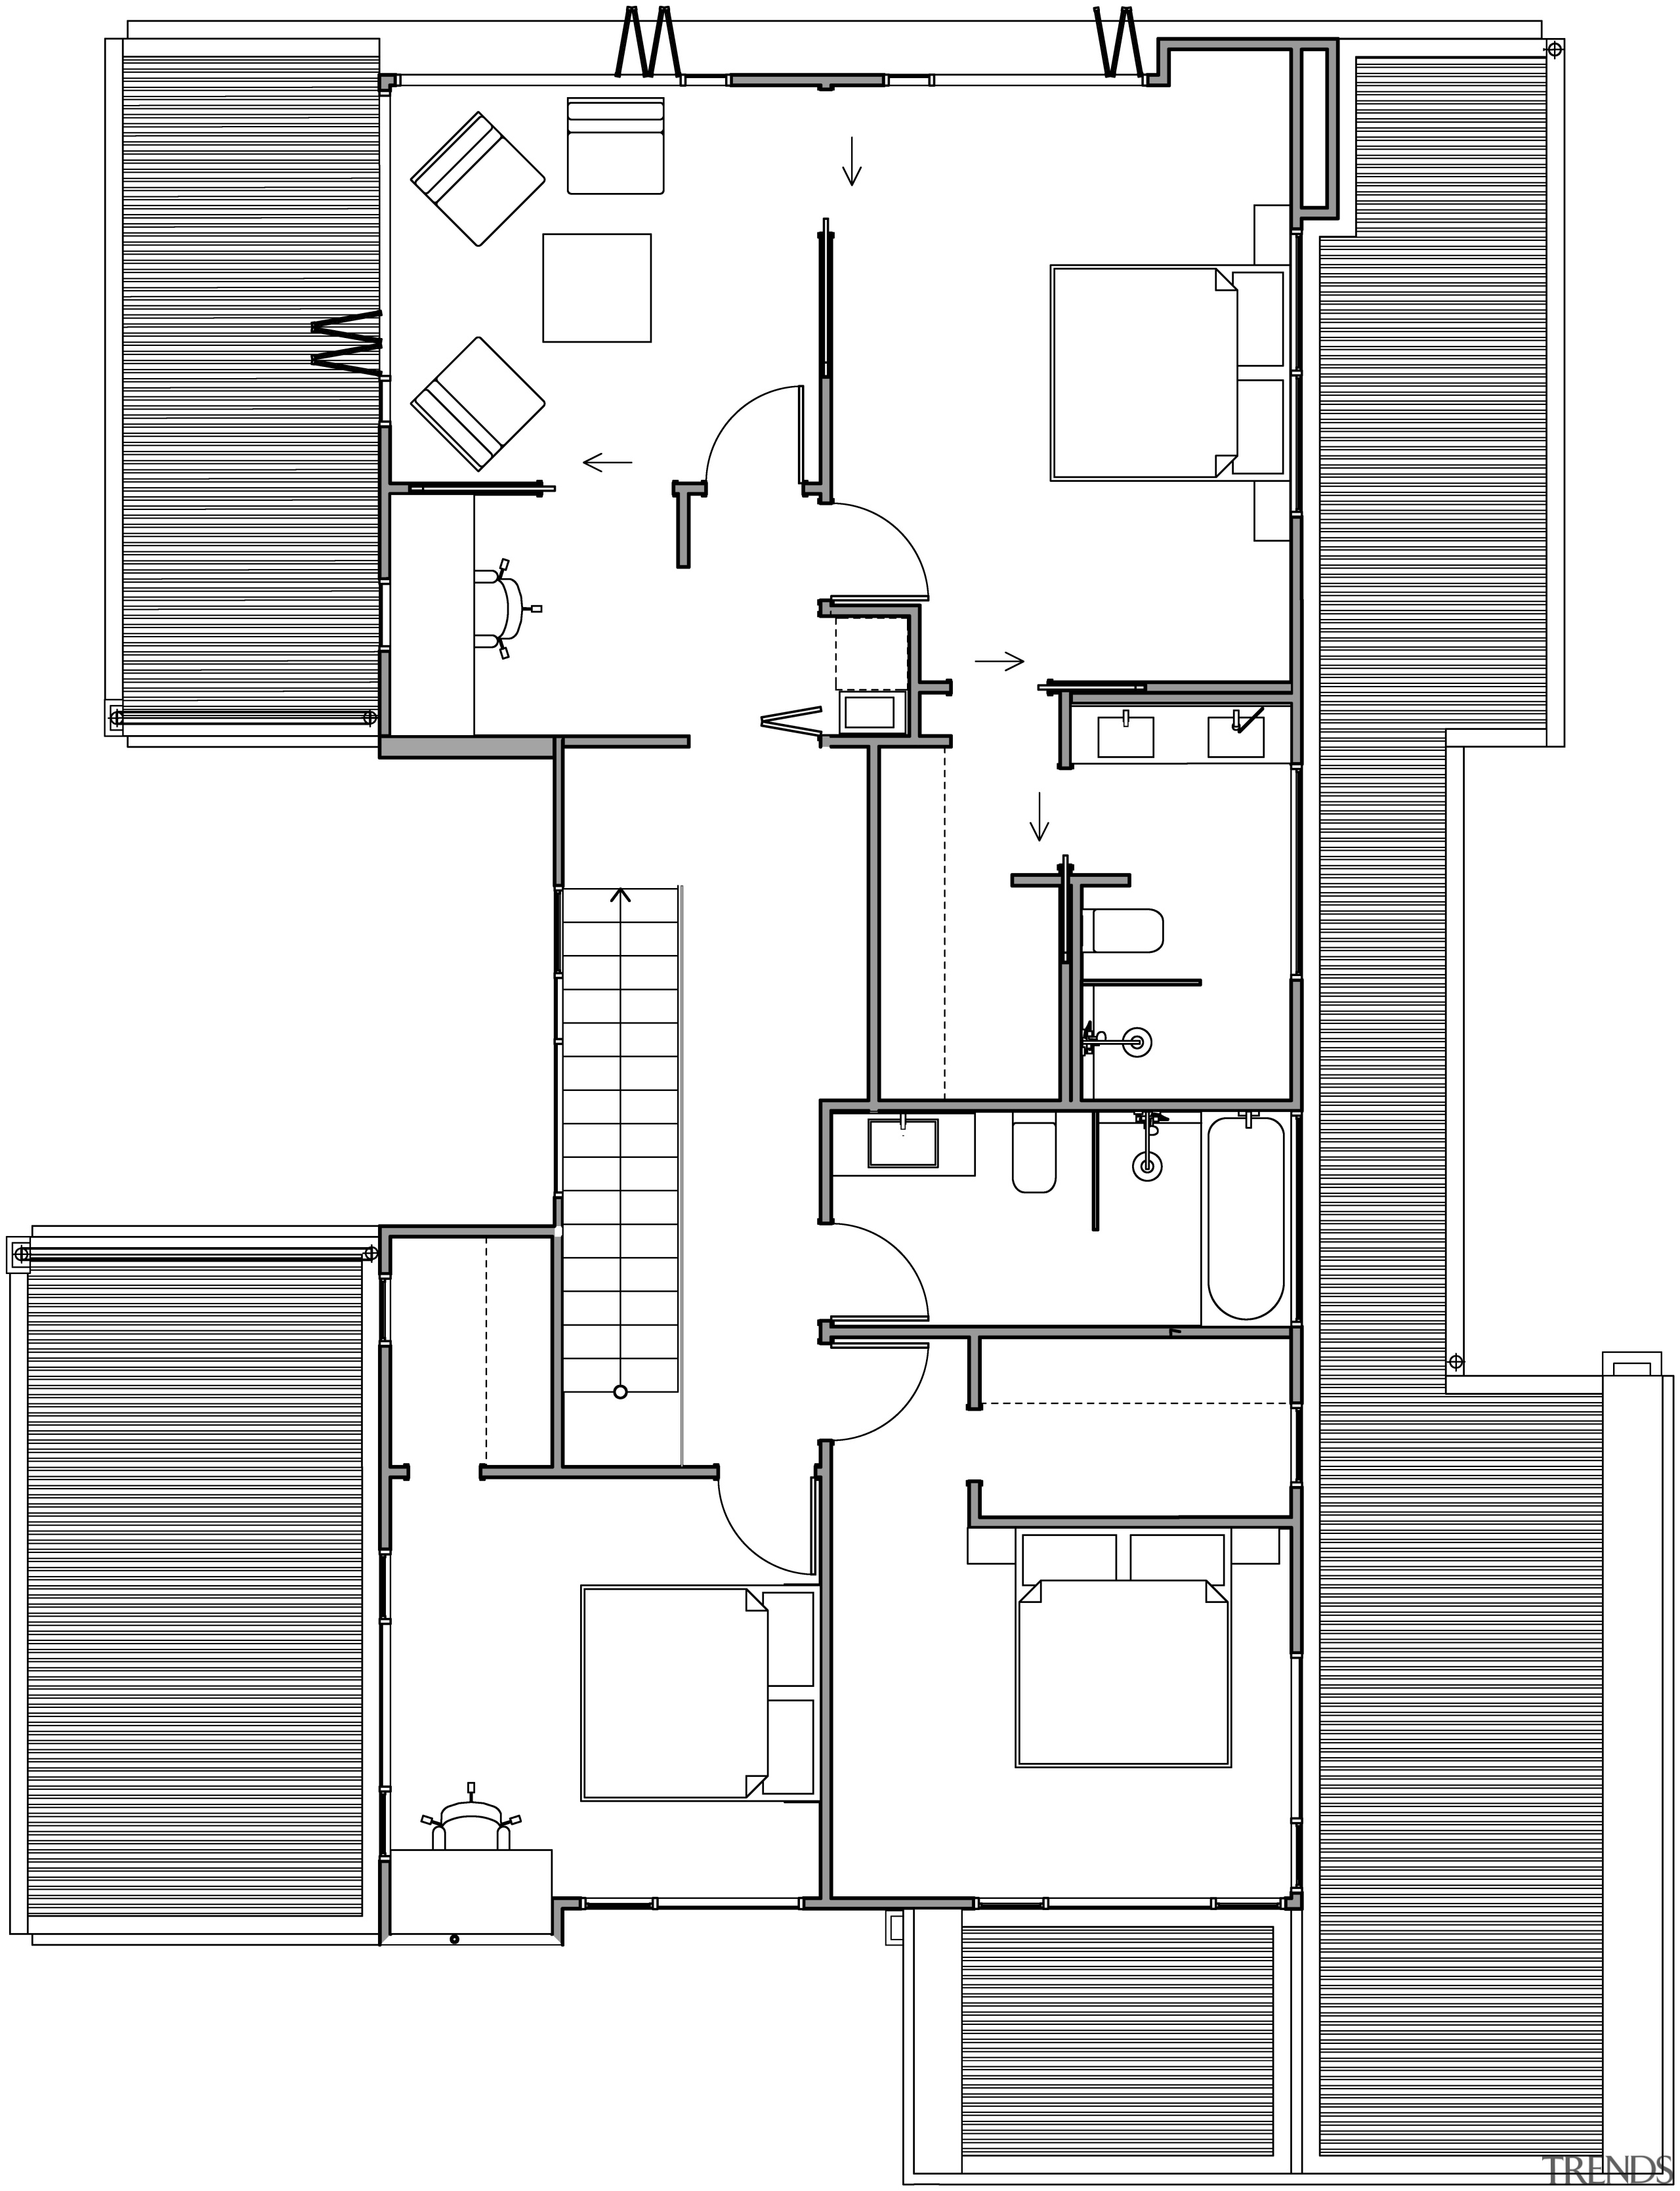 This upper level of a house by Architecture angle, architecture, area, black and white, design, diagram, drawing, floor plan, font, line, monochrome, plan, product, product design, structure, technical drawing, text, white